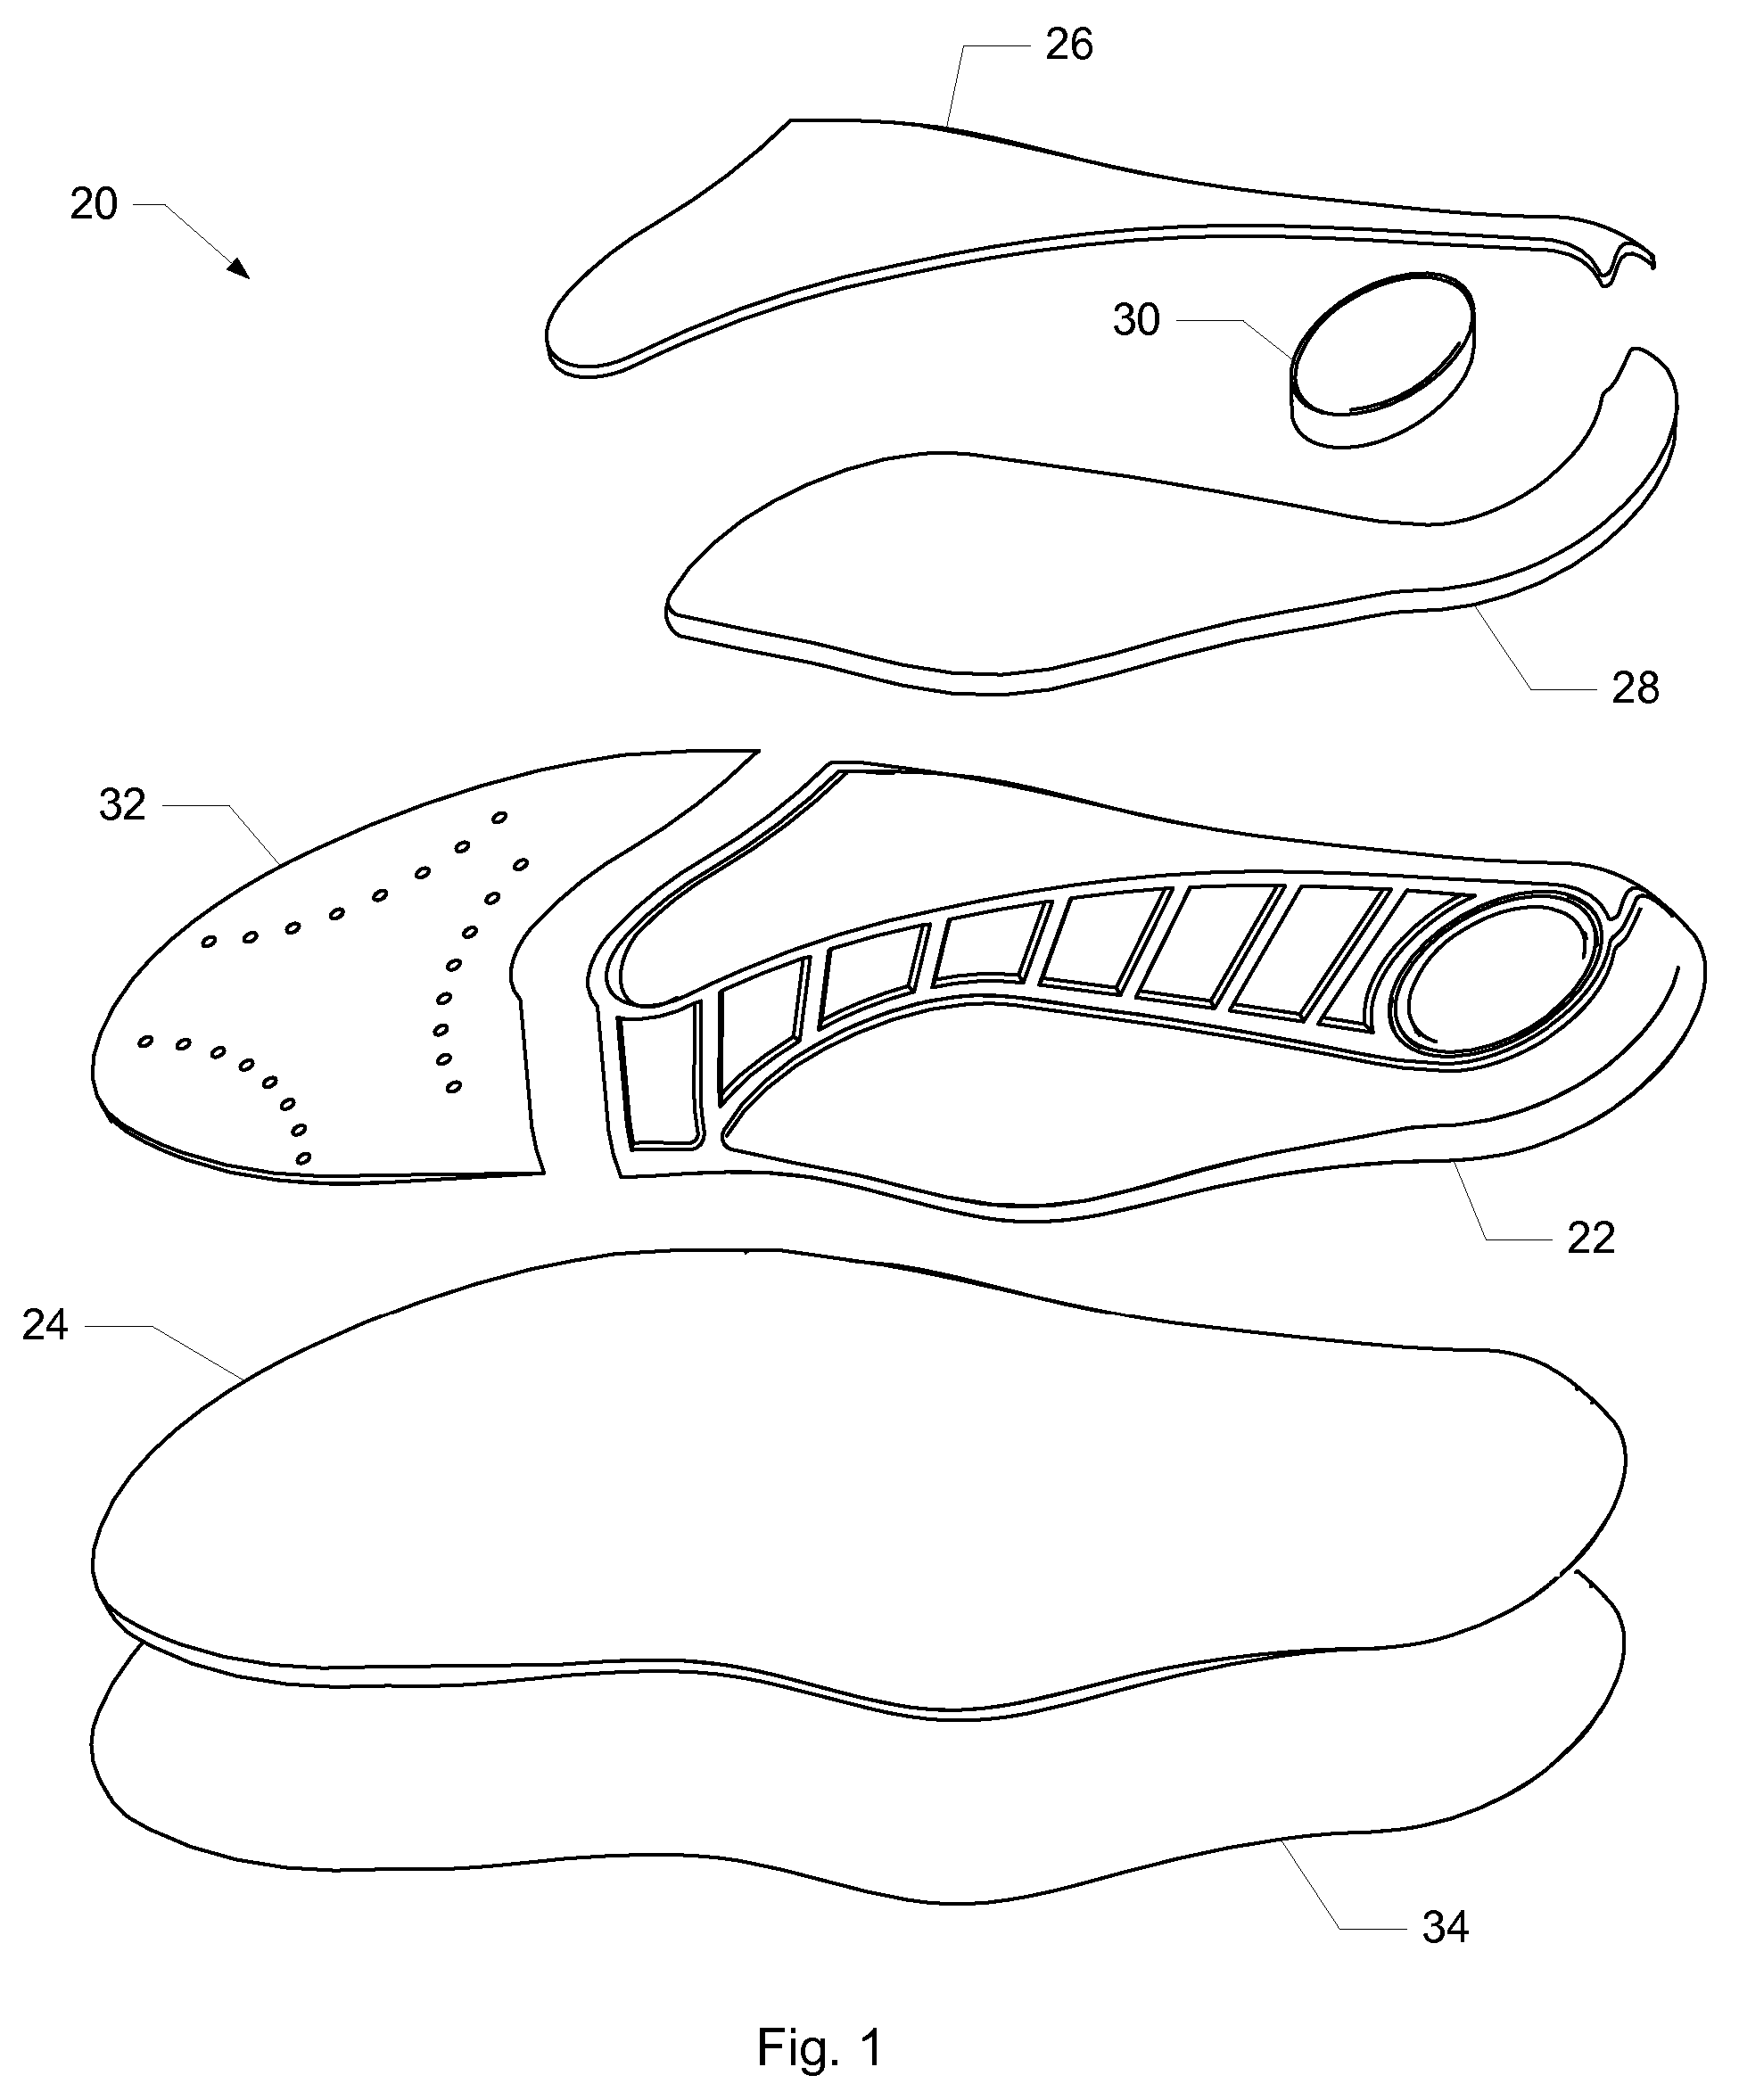 Shoe insole with improved support and motion control